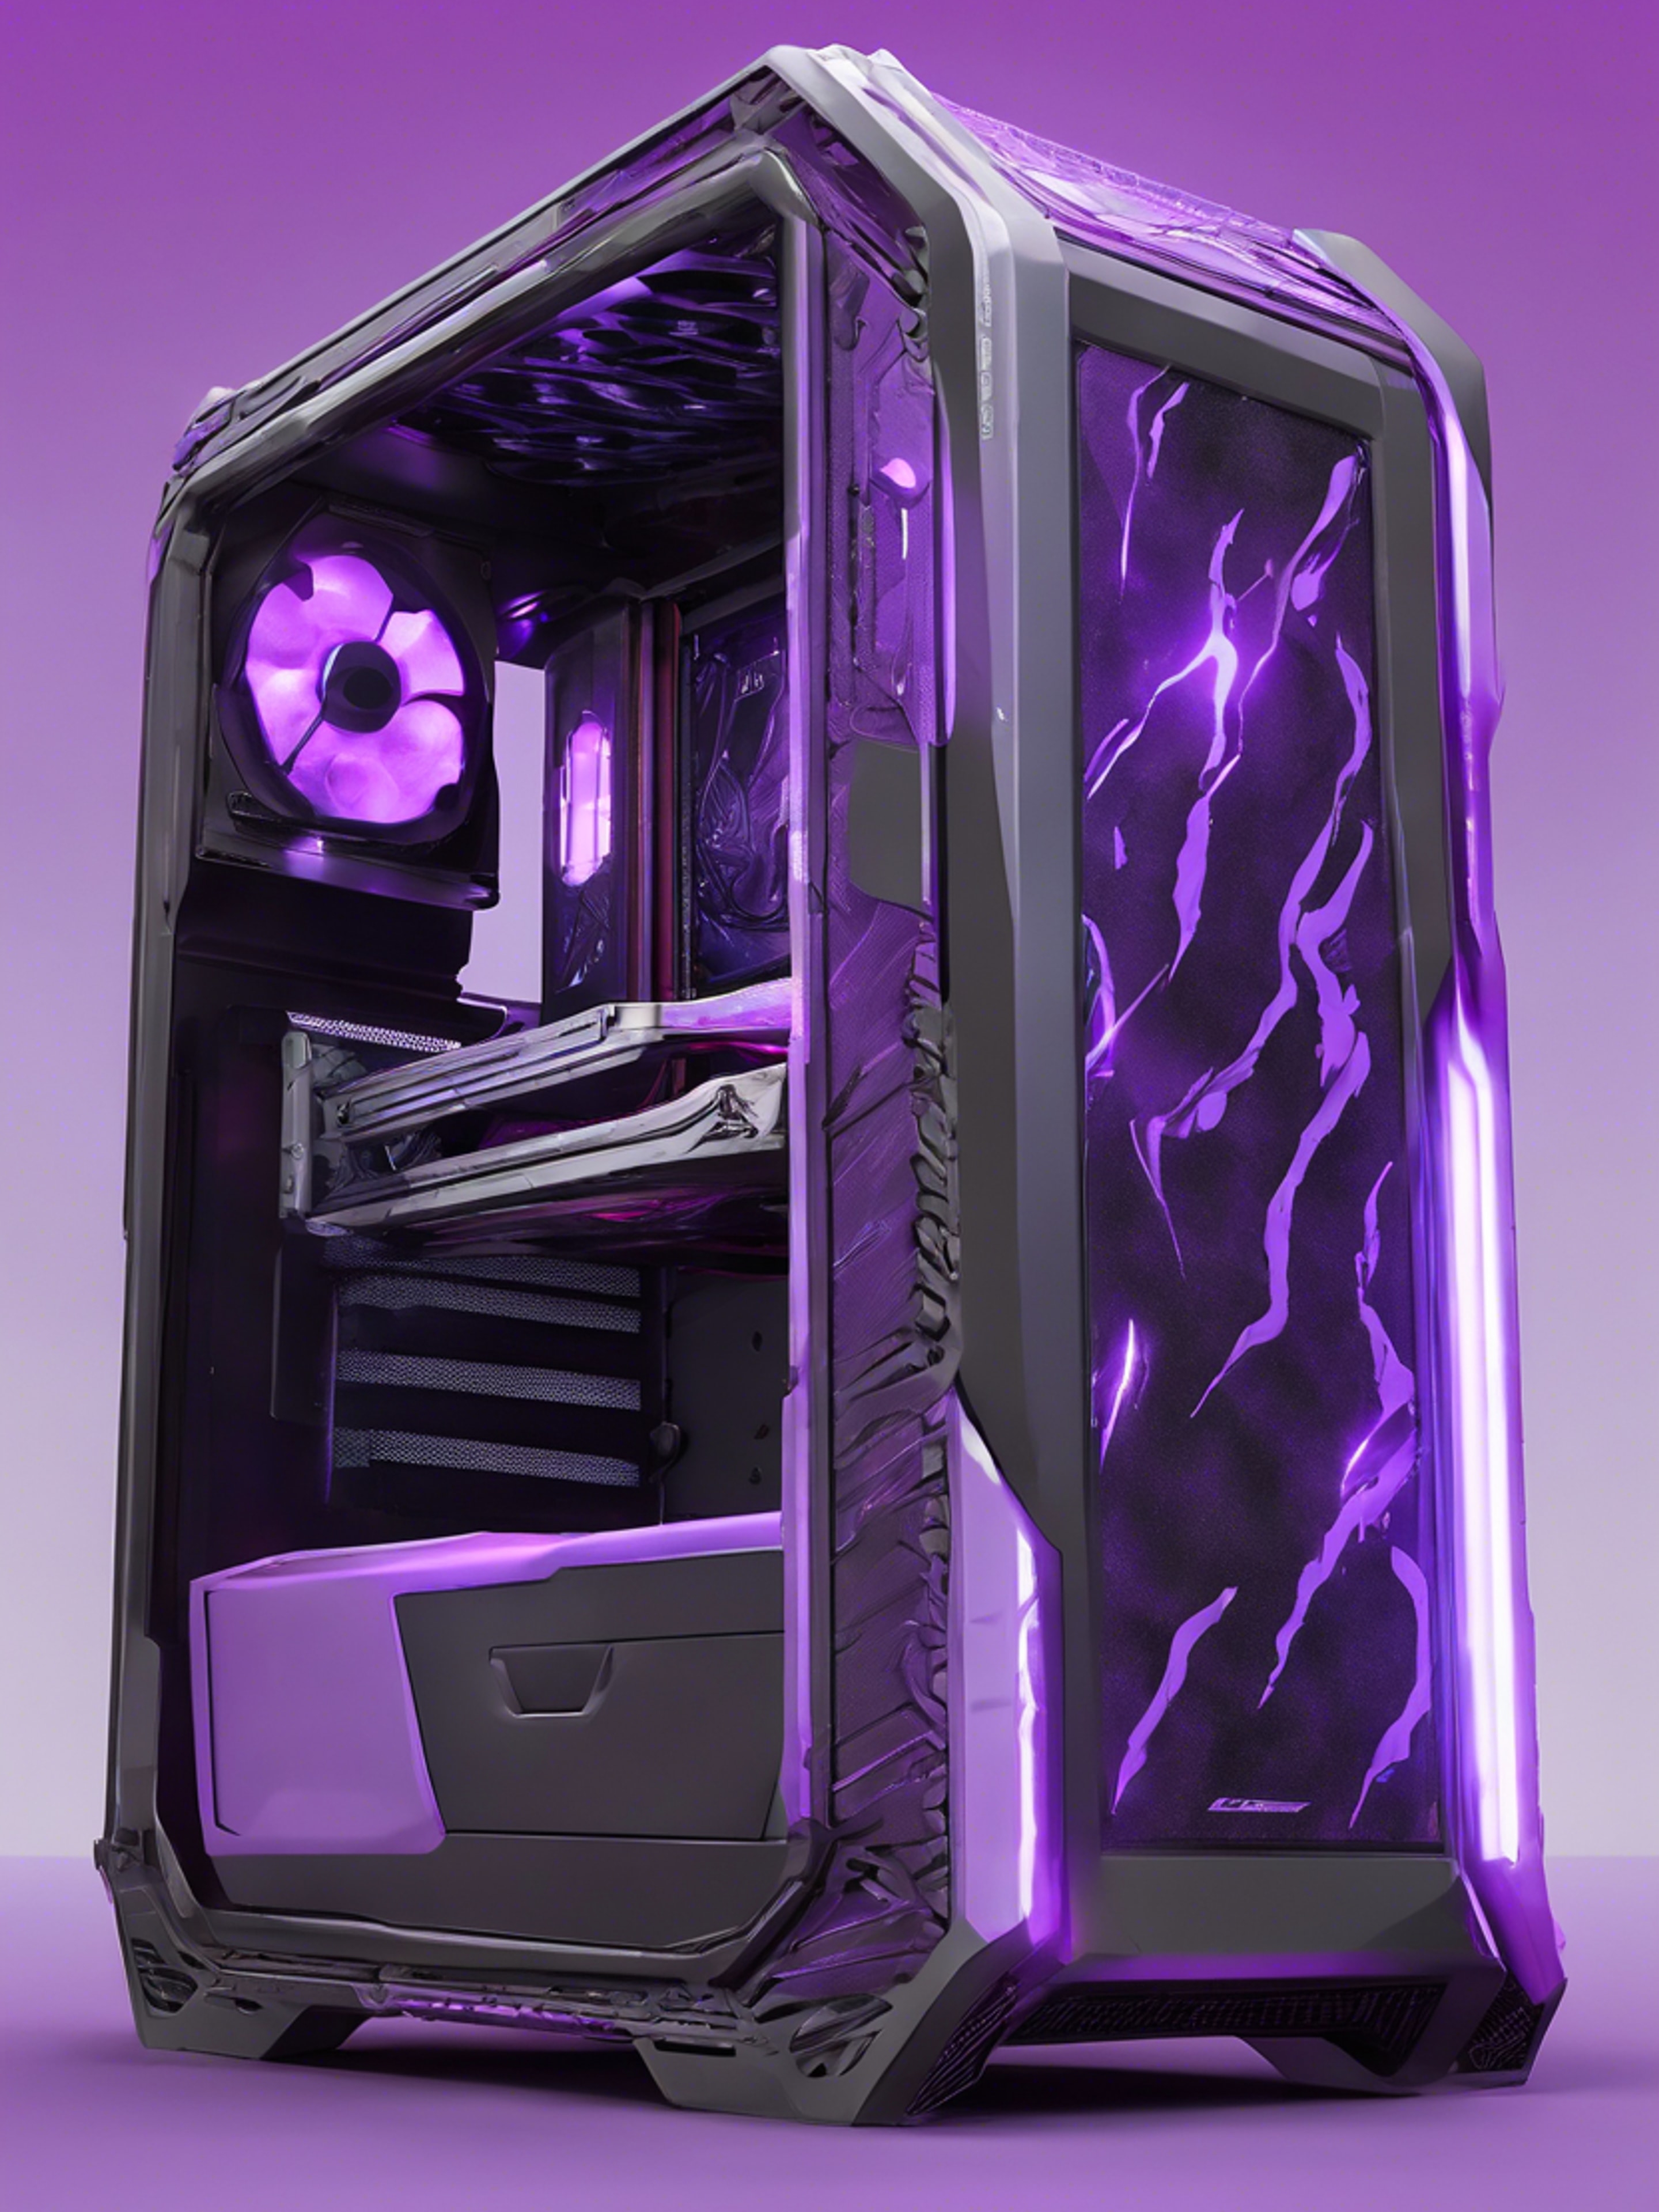 A side view of a thunderous gaming rig covered in custom neon purple detailing under cool lighting. Тапет[cca71b66ee6840febbf4]